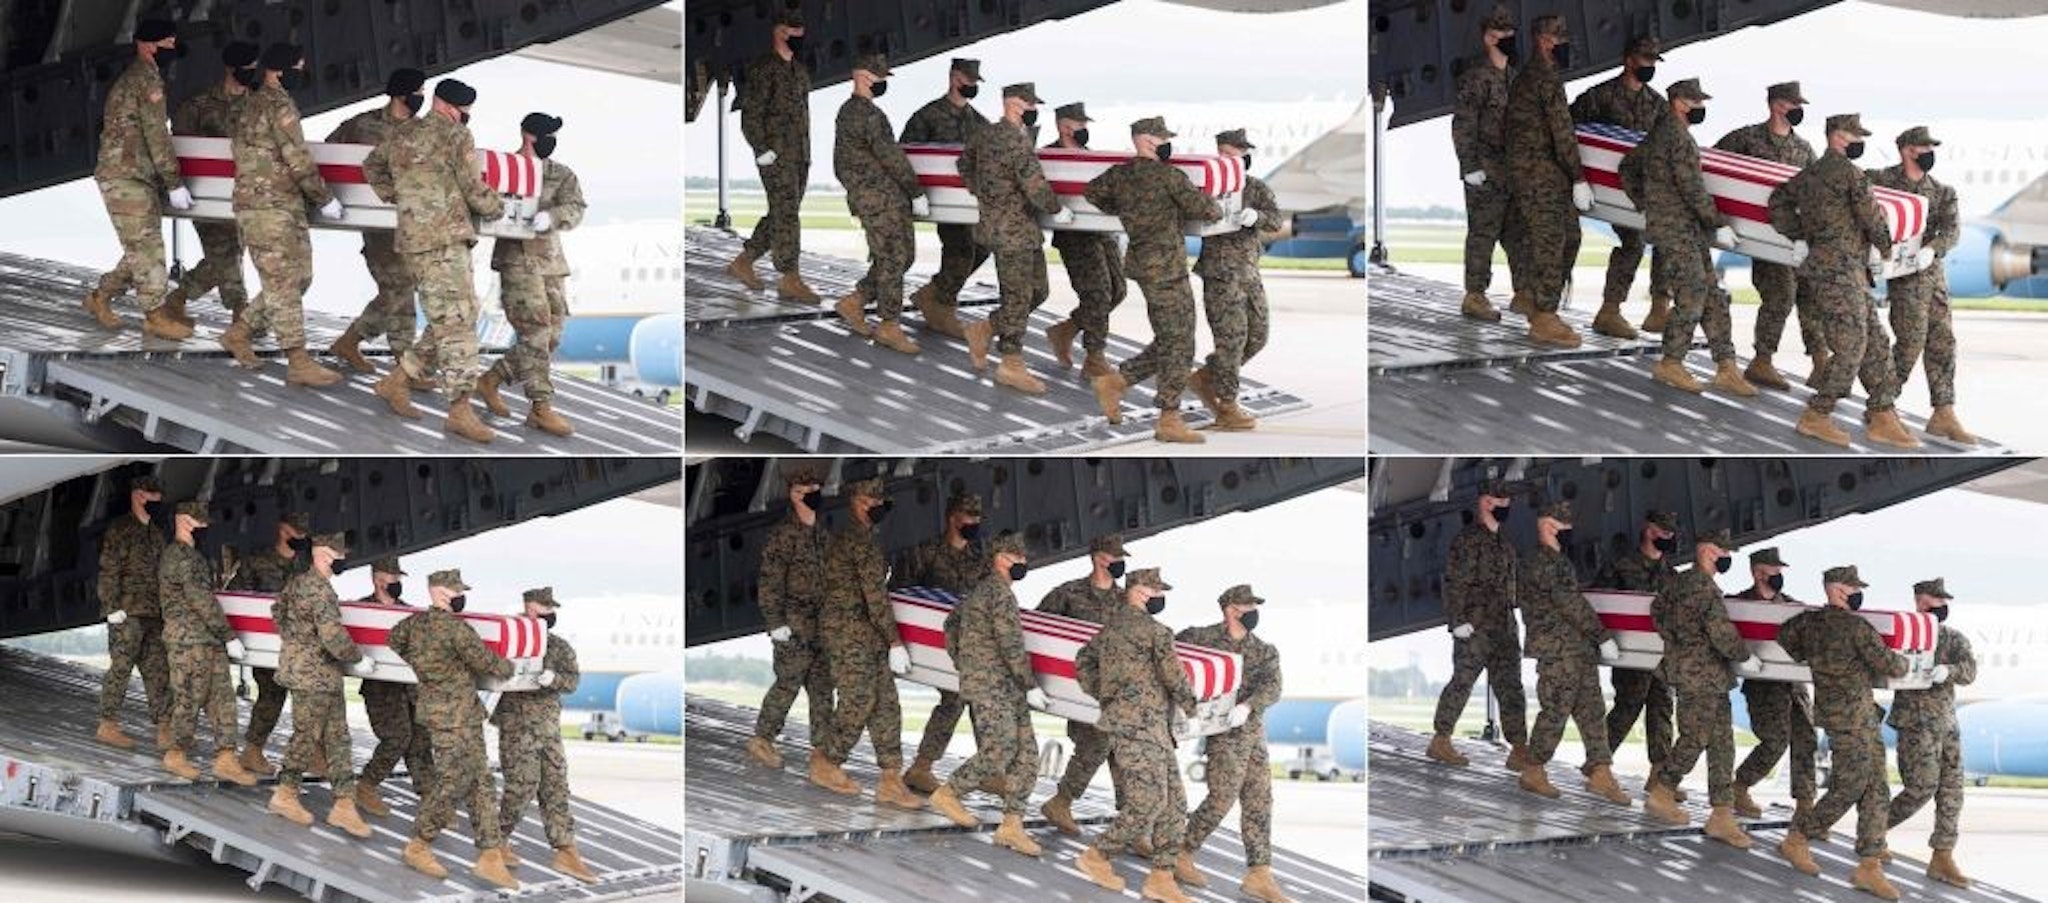 (COMBO) Military transfer teams carry one of 11 flag-draped transfer cases with the remains of a member of the military killed last week in Afghanistan off a military aircraft as US President Joe Biden attends the dignified transfer at Dover Air Force Base in Dover, Delaware, August, 29, 2021. - (From L-R, top to bottom row) The 11 service members include Army Staff Sgt. Ryan C. Knauss, 23, of Corryton, Tennessee; Marine Corps Staff Sgt. Darin T. Hoover, 31, of Salt Lake City, Utah; Marine Corps Sgt. Johanny Rosariopichardo, 25, of Lawrence, Massachusetts; Marine Corps Sgt. Nicole L. Gee, 23, of Sacramento, California; Marine Corps Cpl. Daegan W. Page, 23, of Omaha, Nebraska; Marine Corps Cpl. Humberto A. Sanchez, 22, of Logansport, Indiana; Marine Corps Lance Cpl. David L. Espinoza, 20, of Rio Bravo, Texas; Marine Corps Lance Cpl. Jared M. Schmitz, 20, of St. Charles, Missouri; Marine Corps Lance Cpl. Dylan R. Merola, 20, of Rancho Cucamonga, California; Marine Corps Lance Cpl. Kareem M. Nikoui, 20, of Norco, California; and Navy Hospitalman Maxton W. Soviak, 22, of Berlin Heights, Ohio. The transfer cases with the remains of two additional service members are not pictured. Dover Air Force Base in Delaware on the US East Coast about two hours from Washington is synonymous with the painful return of service members who have fallen in combat. (Photo by SAUL LOEB / AFP) (Photo by